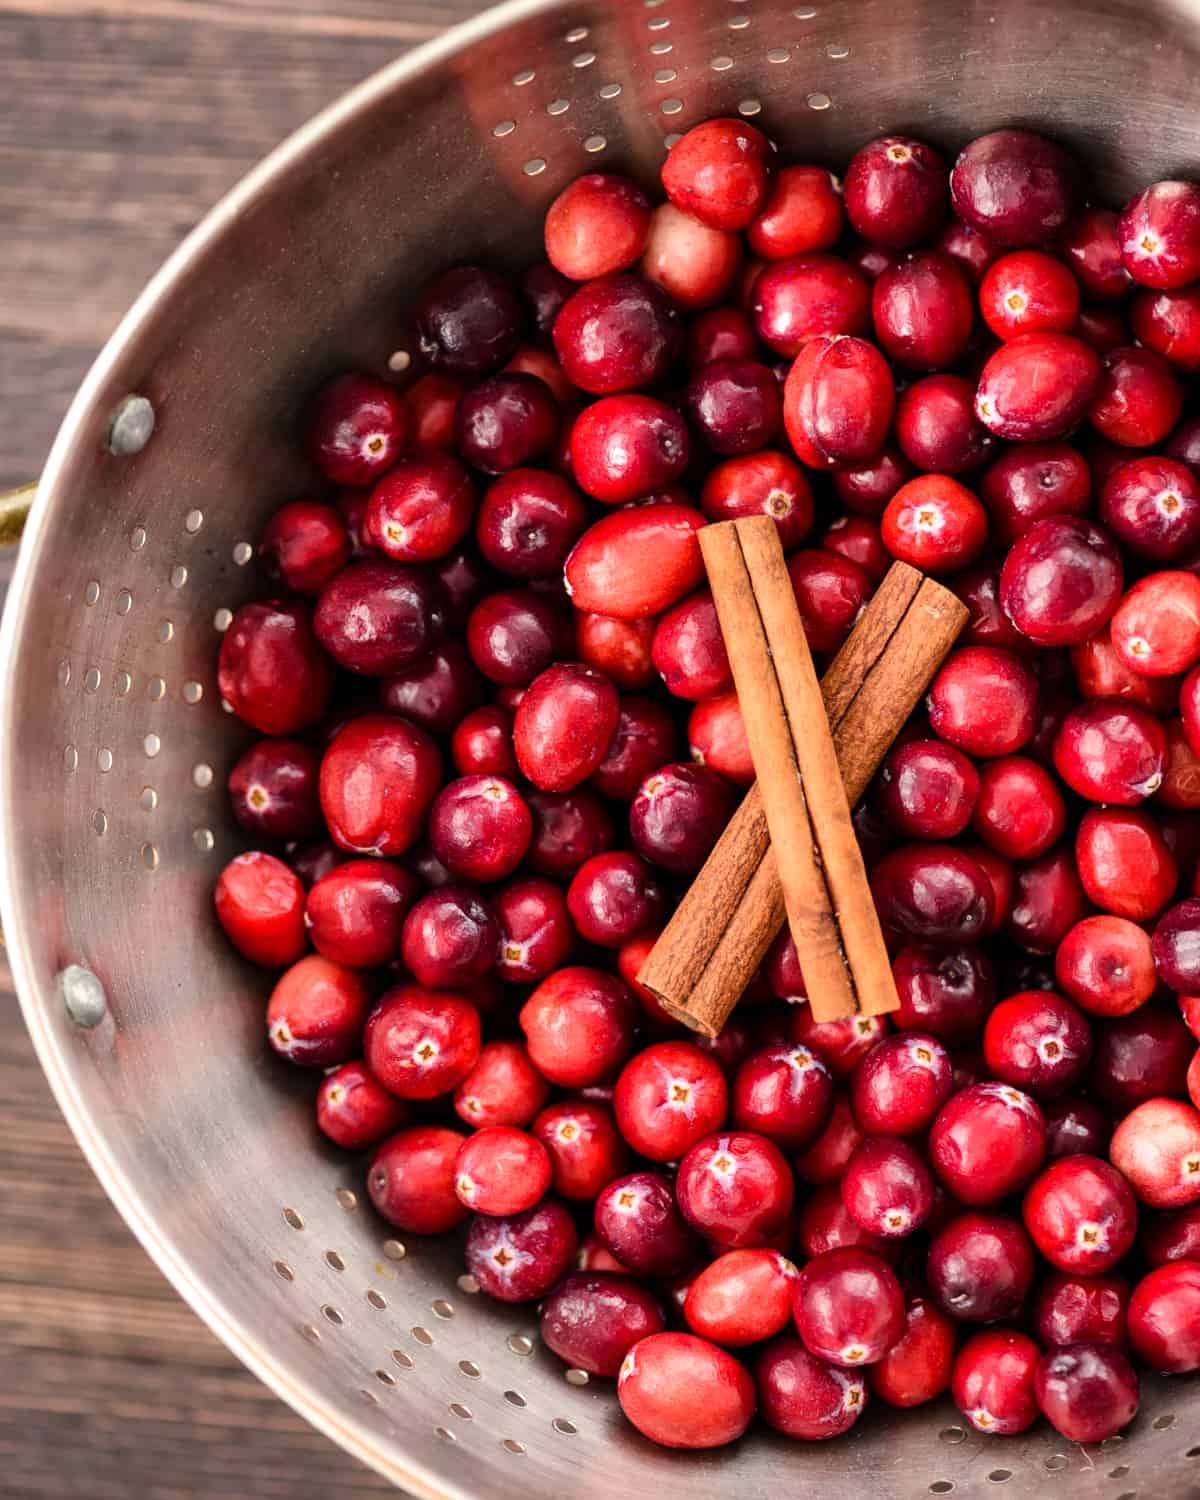 Overhead view of a colander with fresh cranberries and cinnamon sticks in it in the making of Healthy Cranberry Sauce